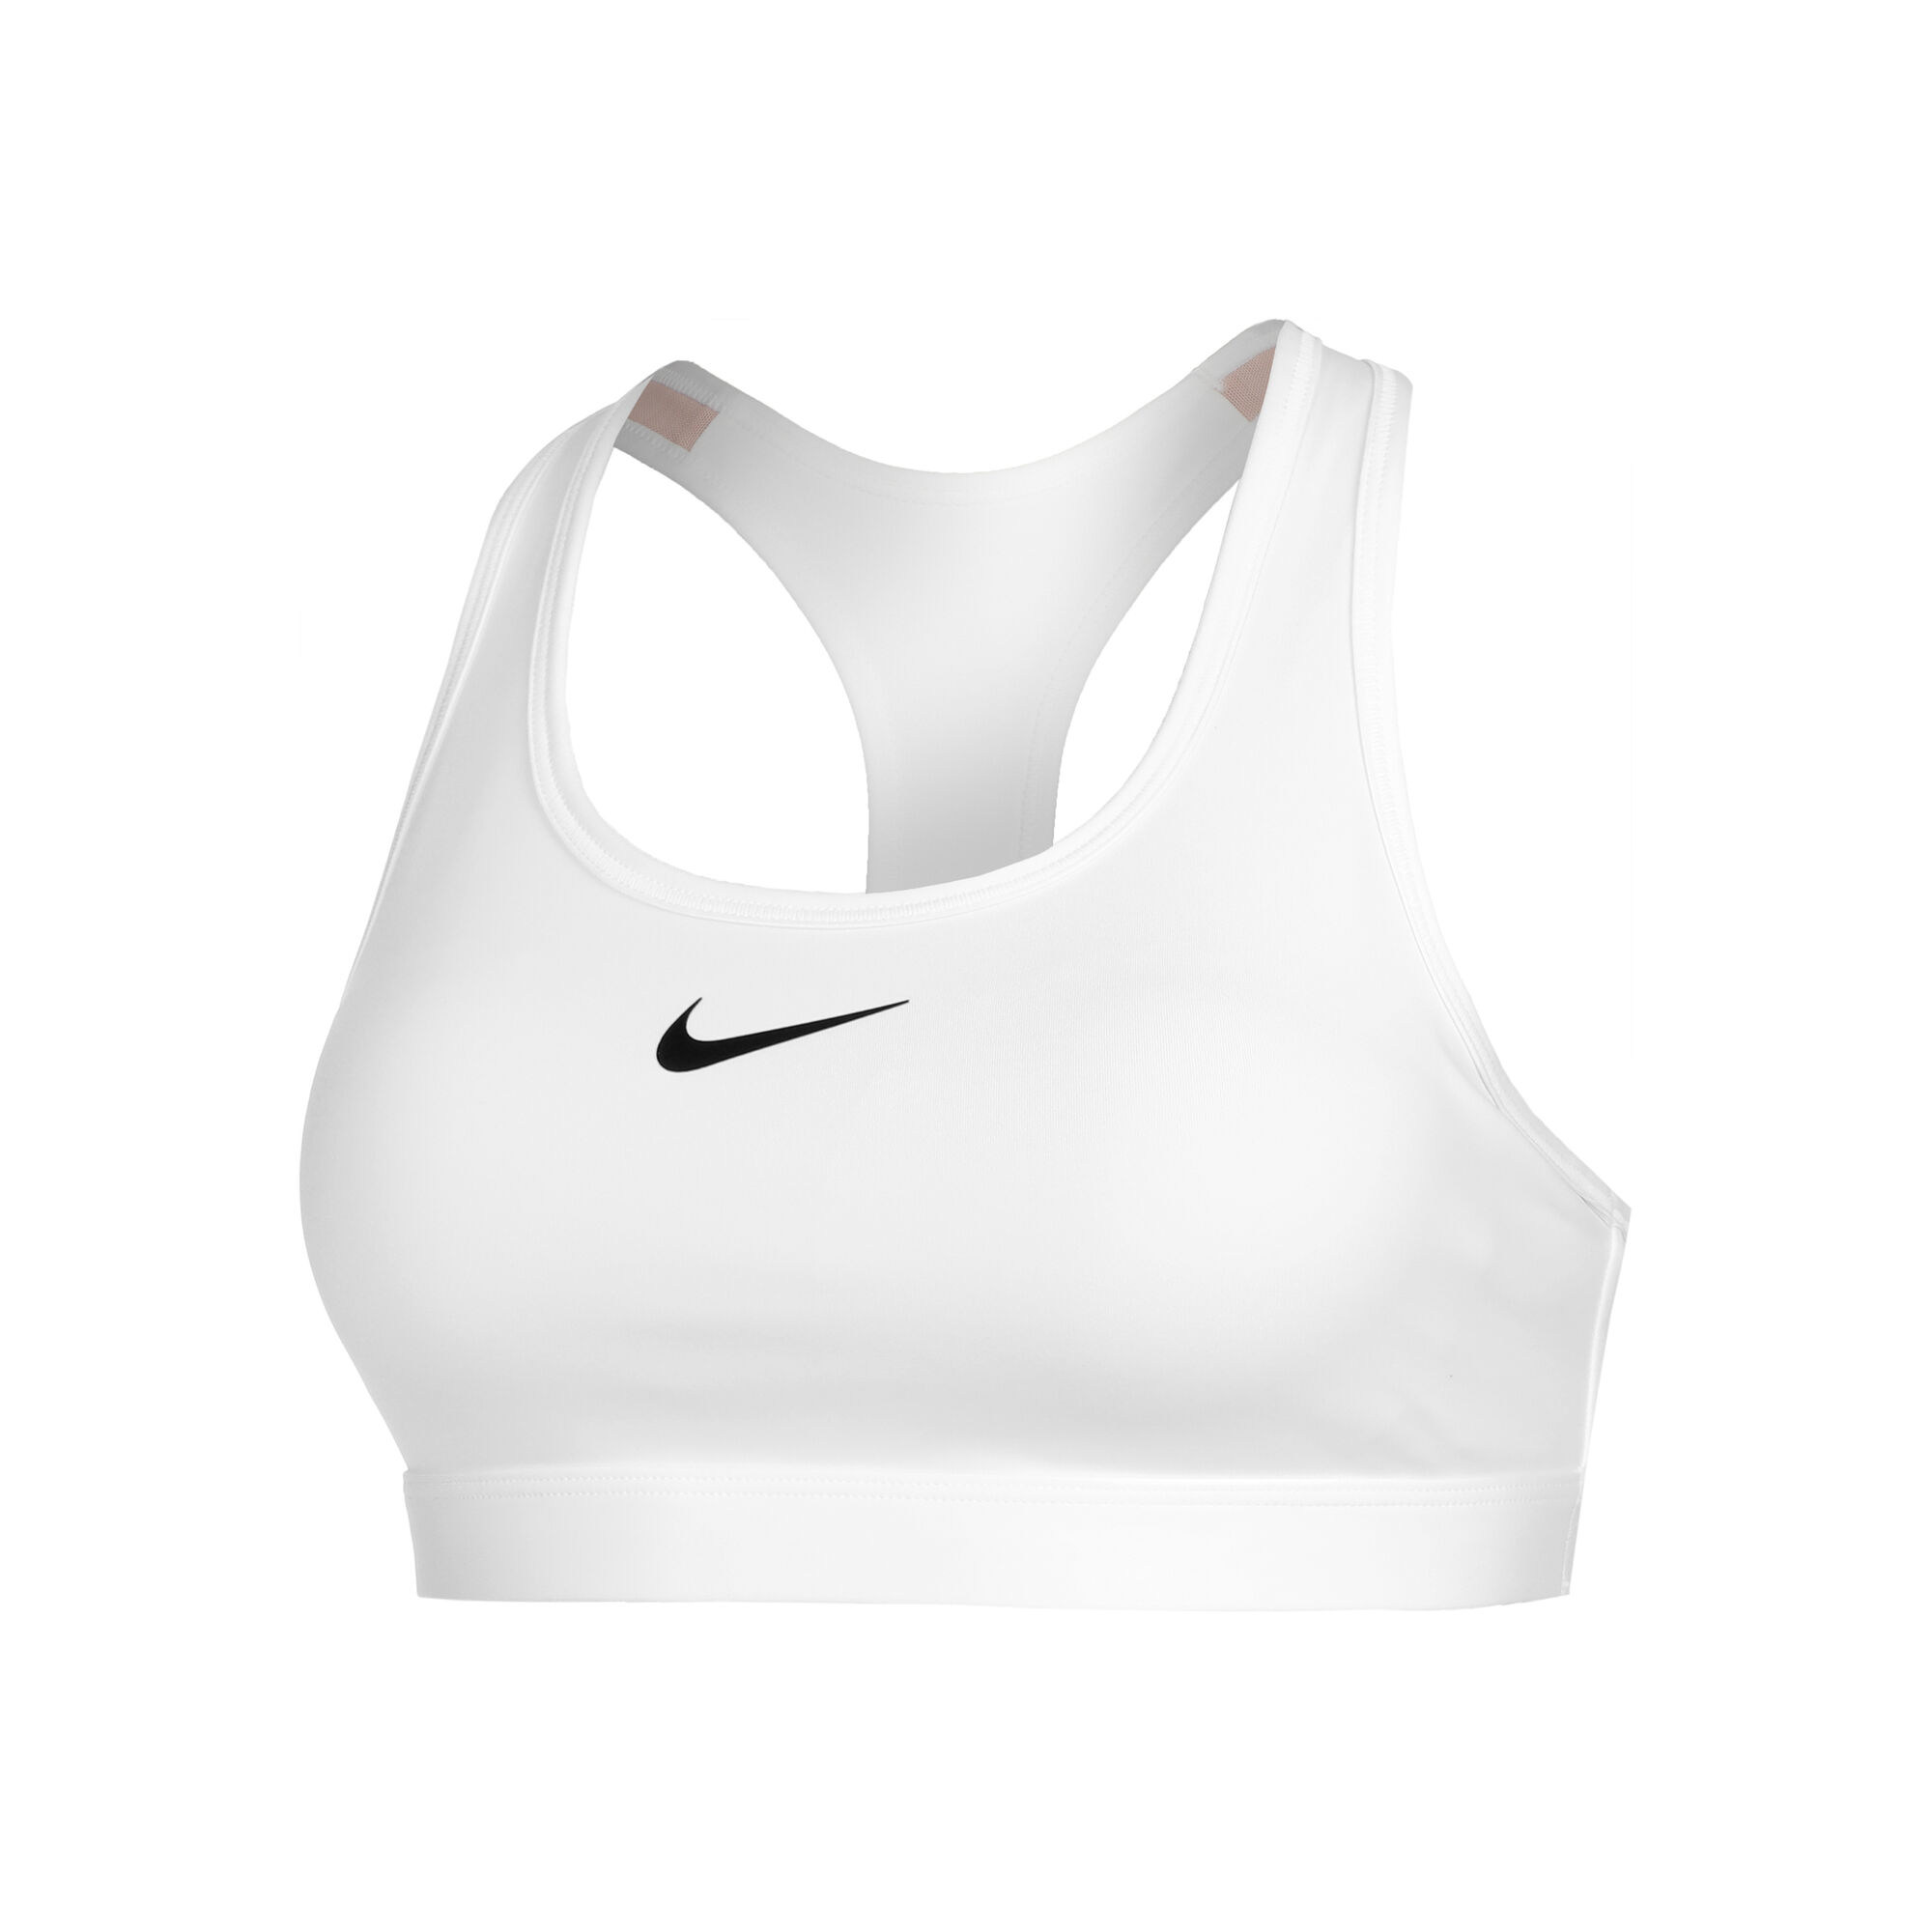 NIKE DRI-FIT HIGH SUPPORT SPORTS BRA WOMENS SIZE S RETAIL for sale online